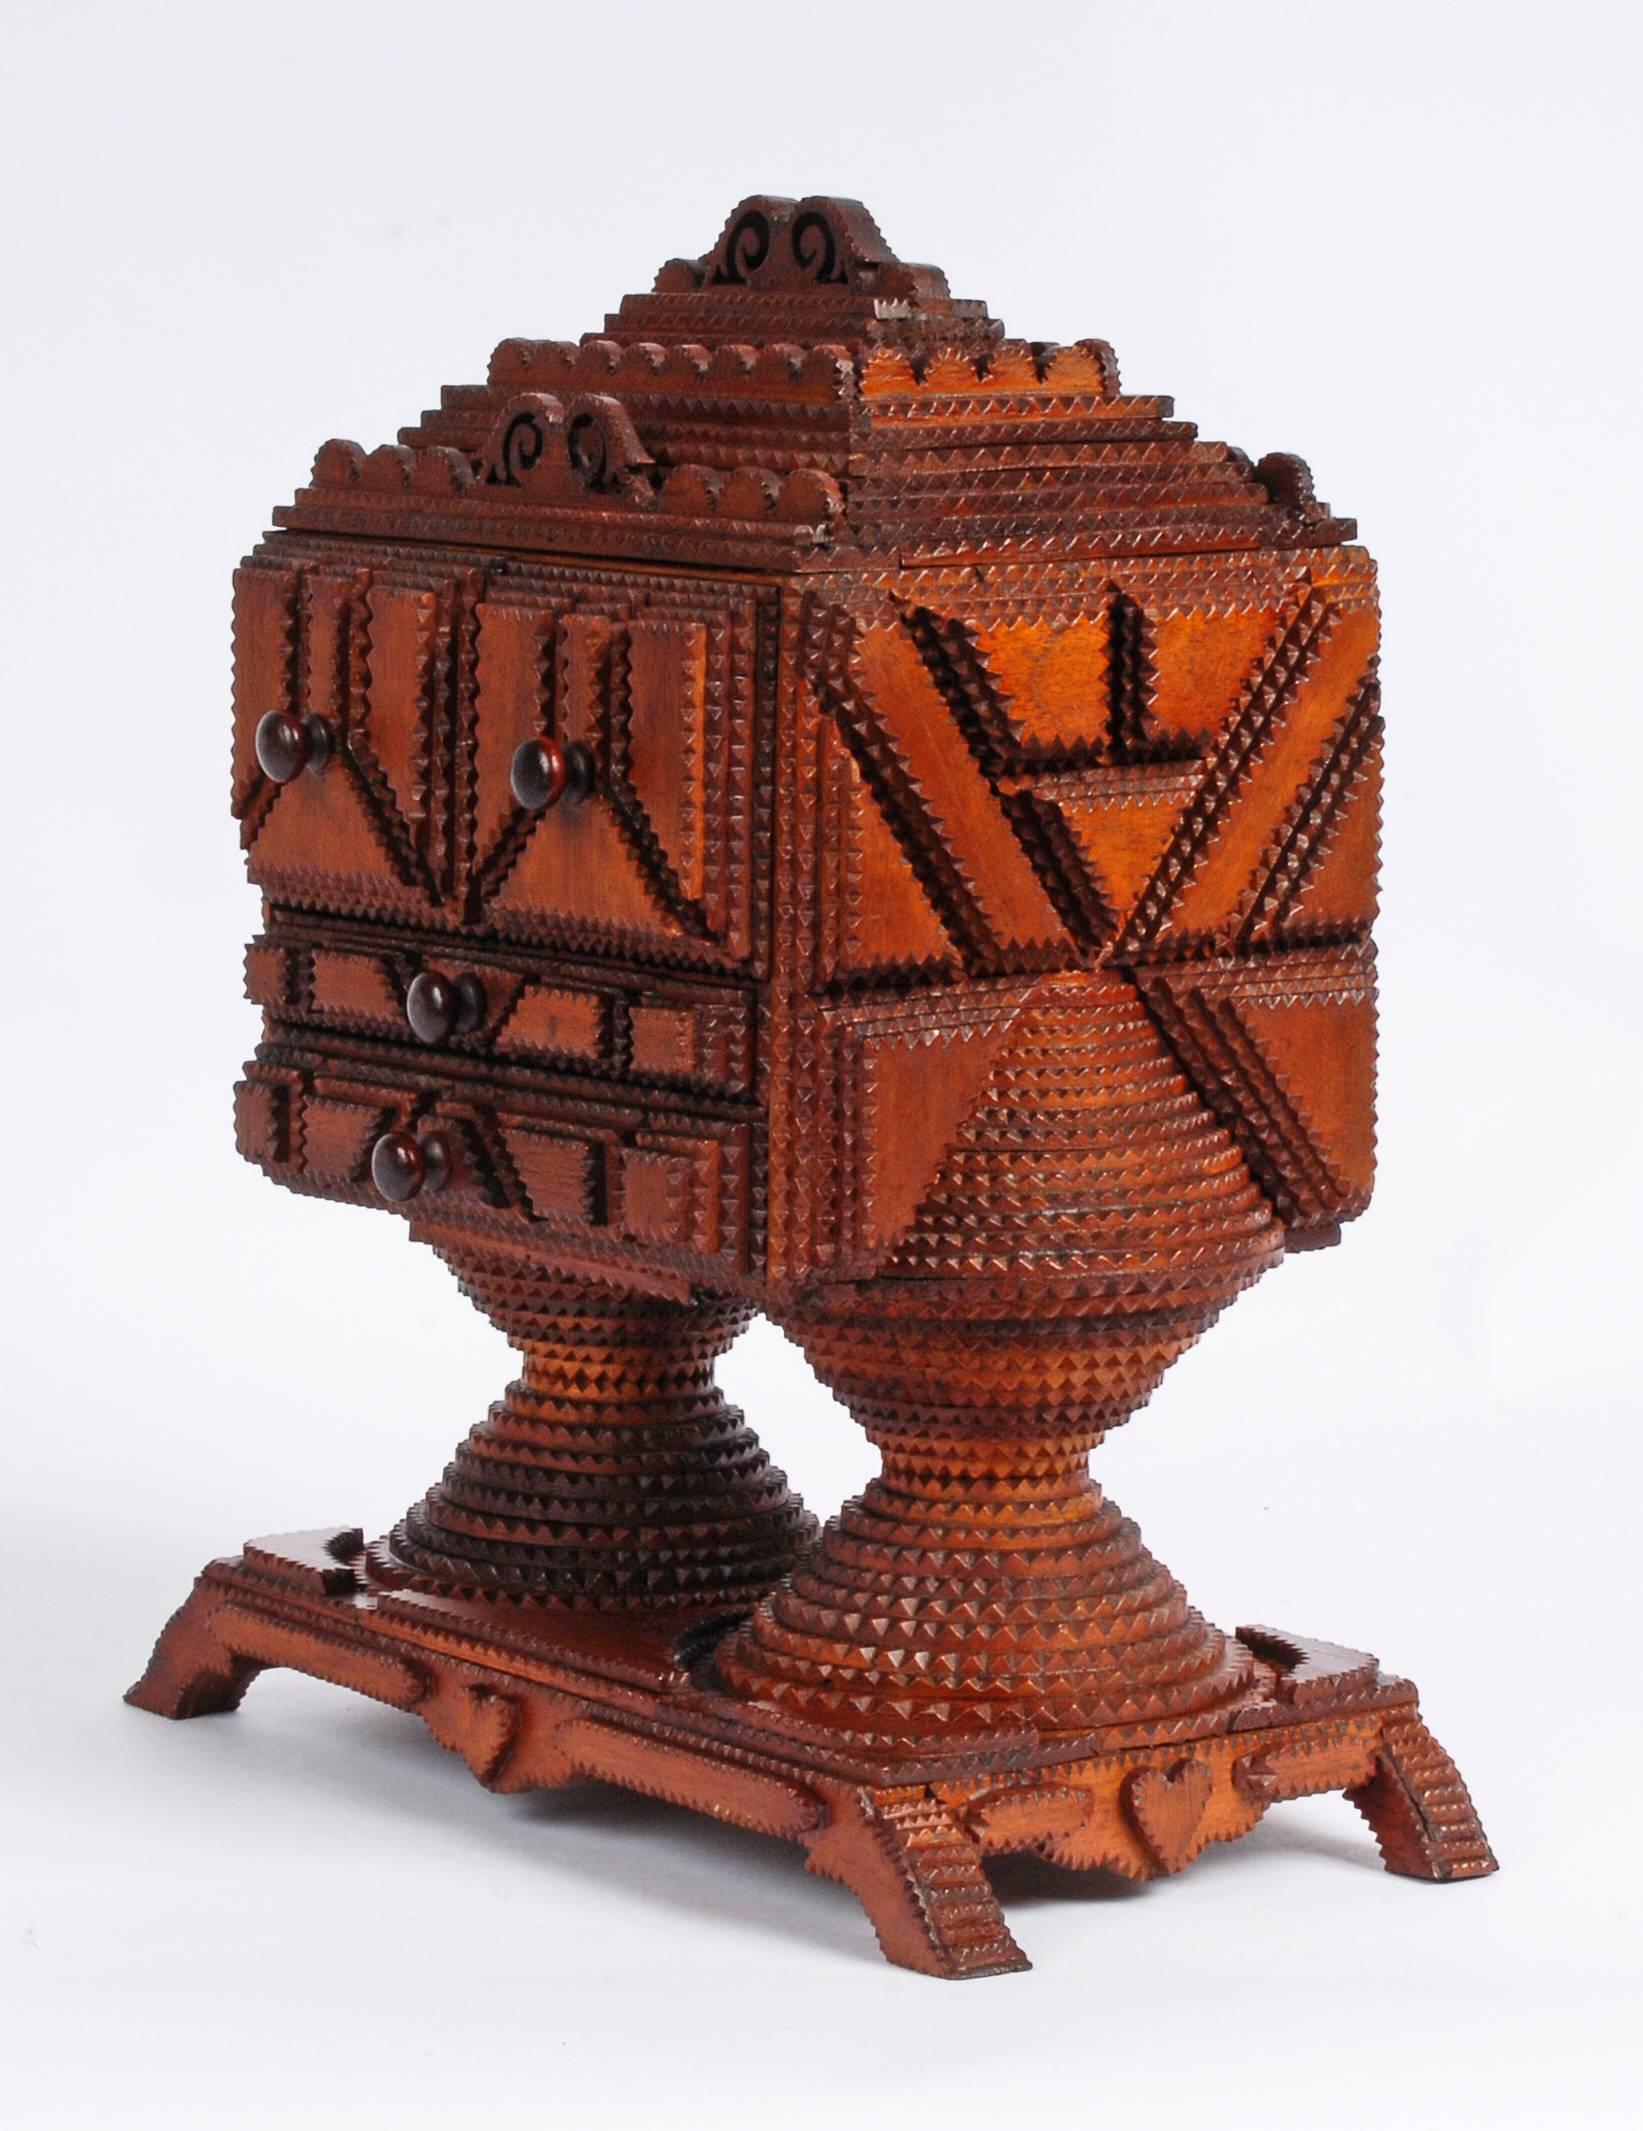 A significant sculptural Tramp Art conical based pedestal box with four drawers. One of the best Tramp Art objects with an impressive texture of patterning and exhibiting a rich patina. The conical spheres supporting the top are 22 layers deep. It